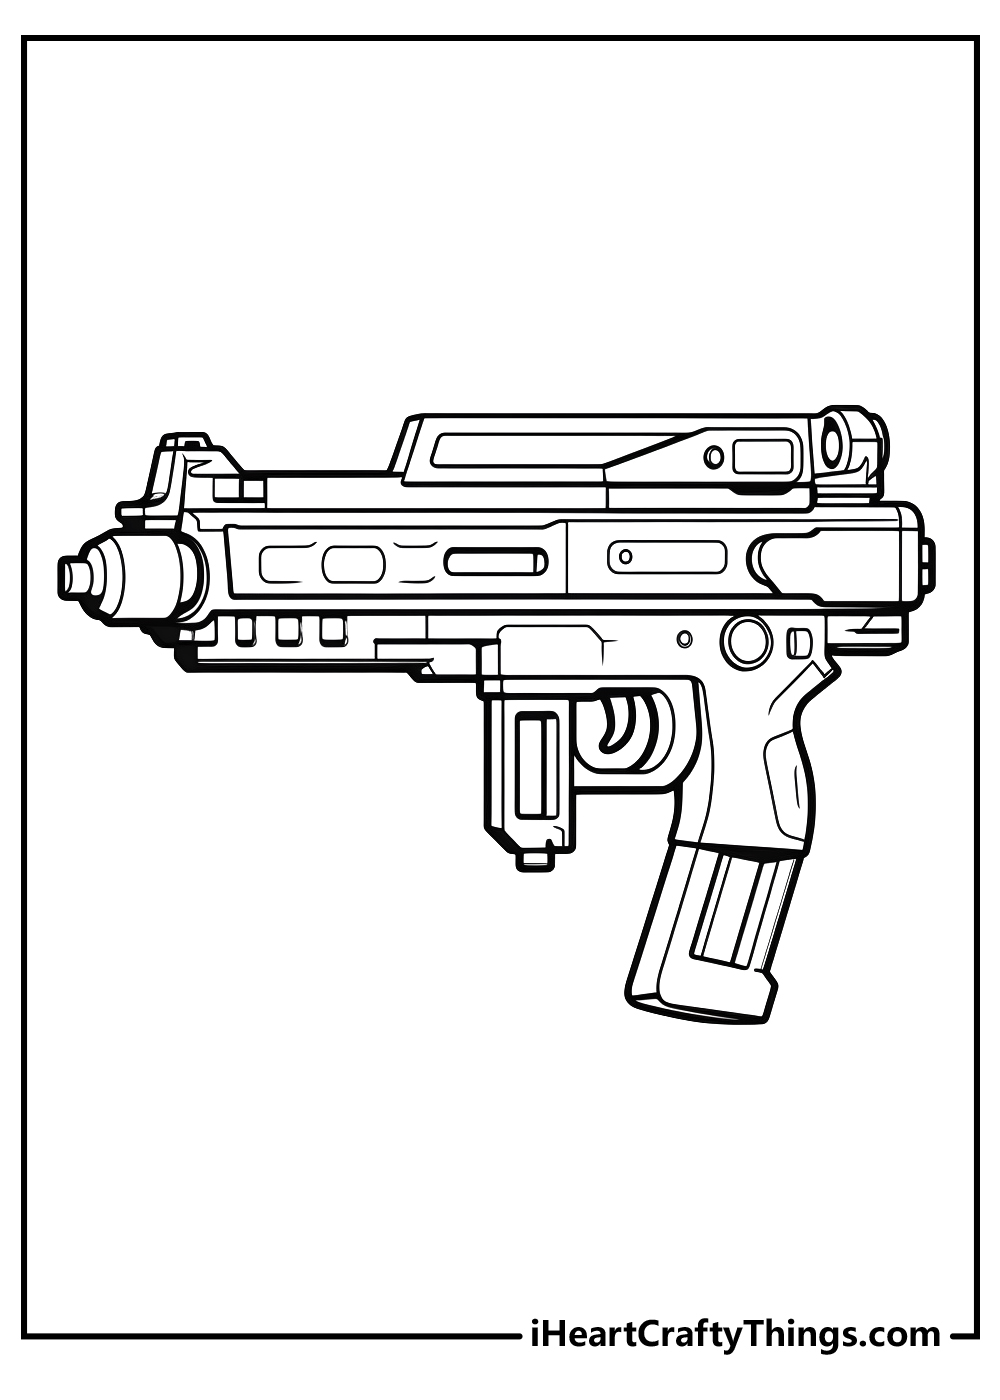 Nerf Coloring Page - Super Fun Coloring